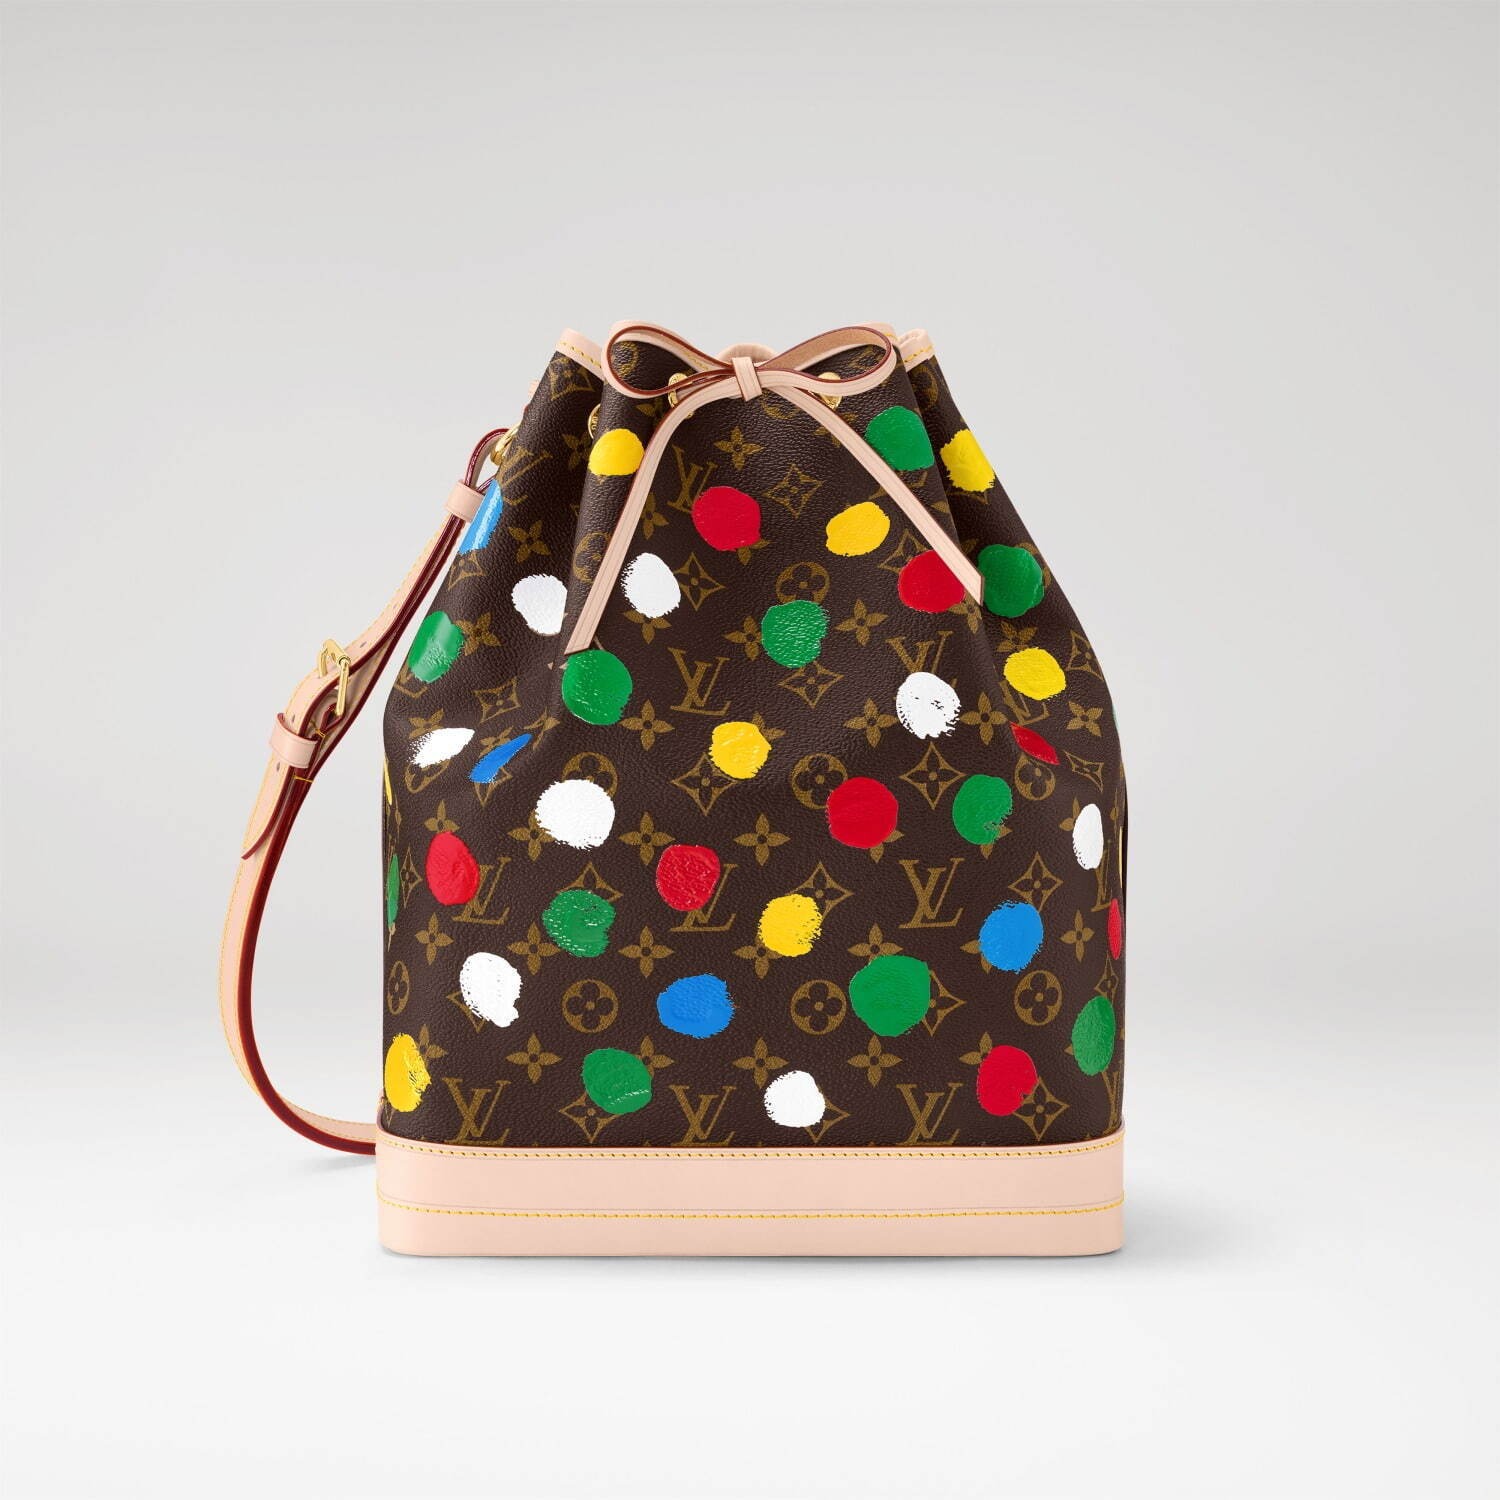 Louis Vuitton Rejoins the World of Yahoo Kusama for New